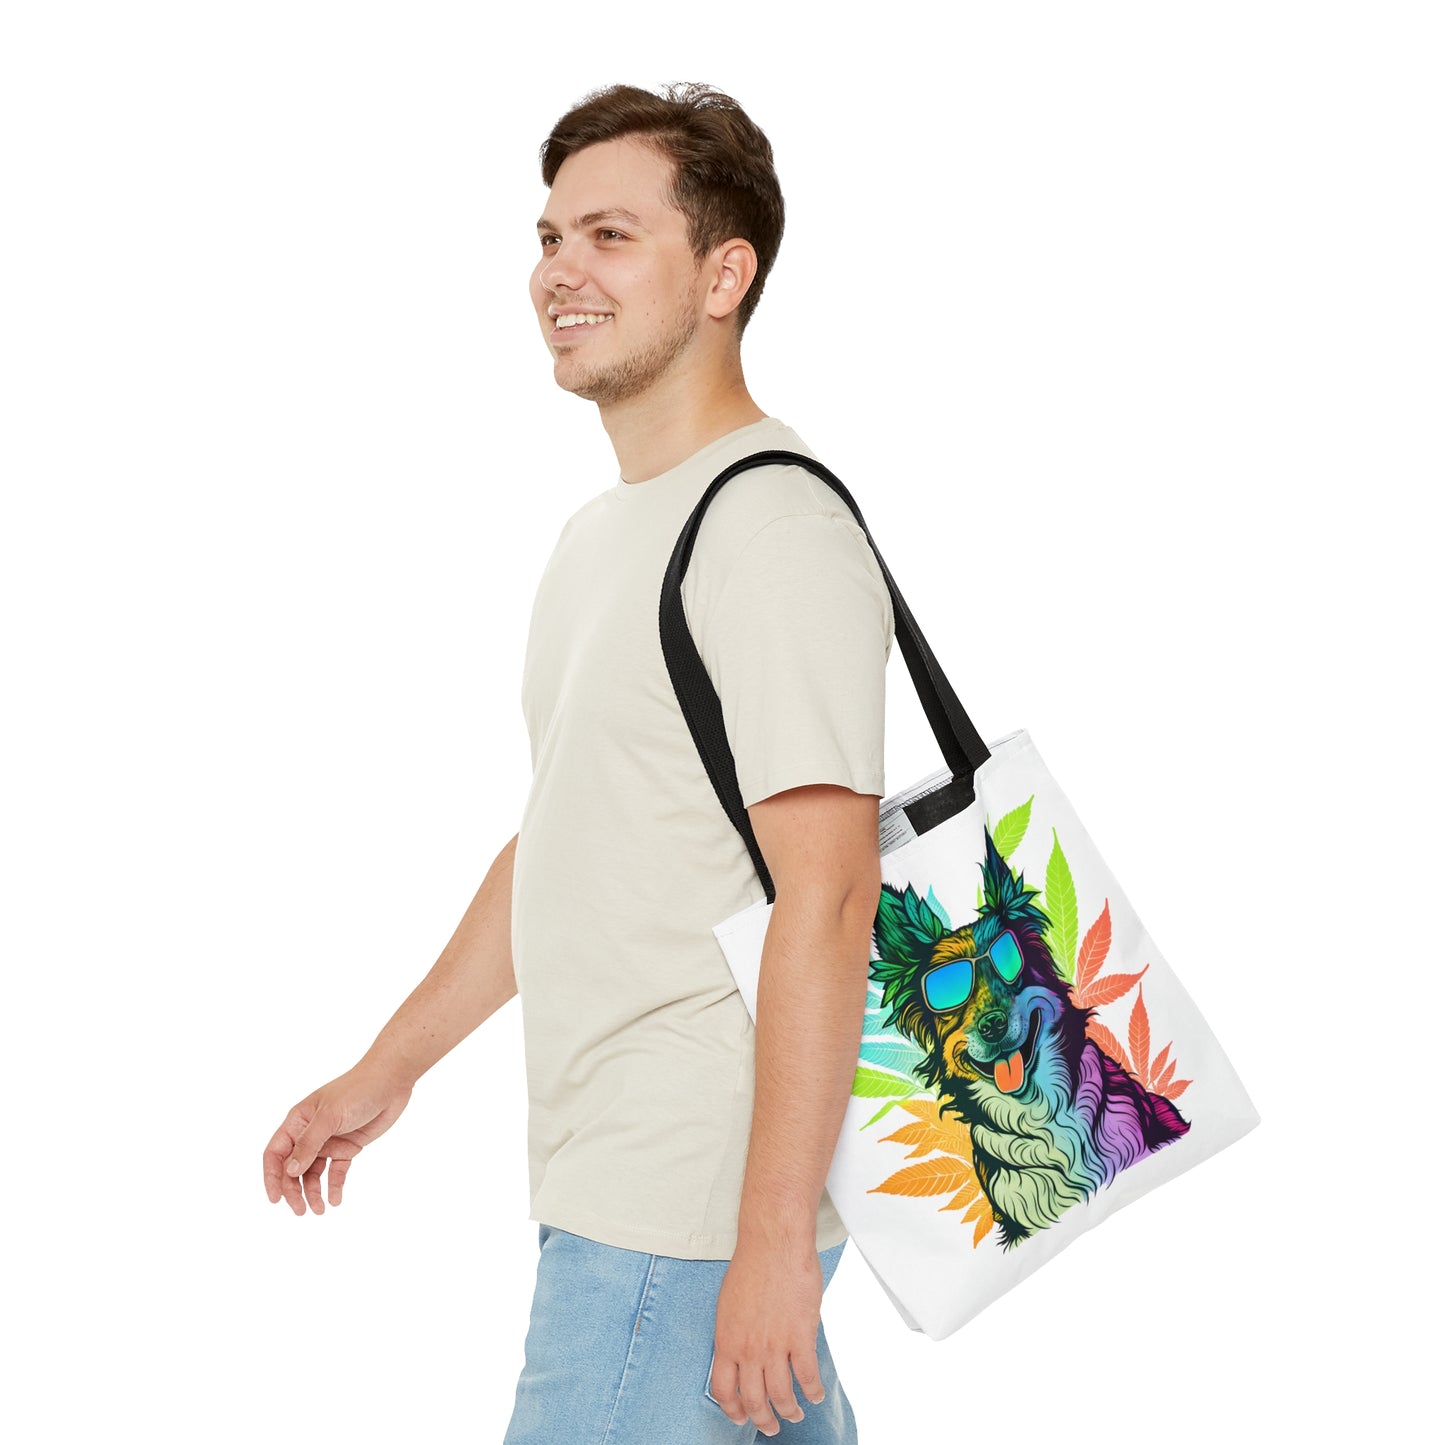 A man is happy to wear the Cool Border Collie With Shades and Weed Tote Bag